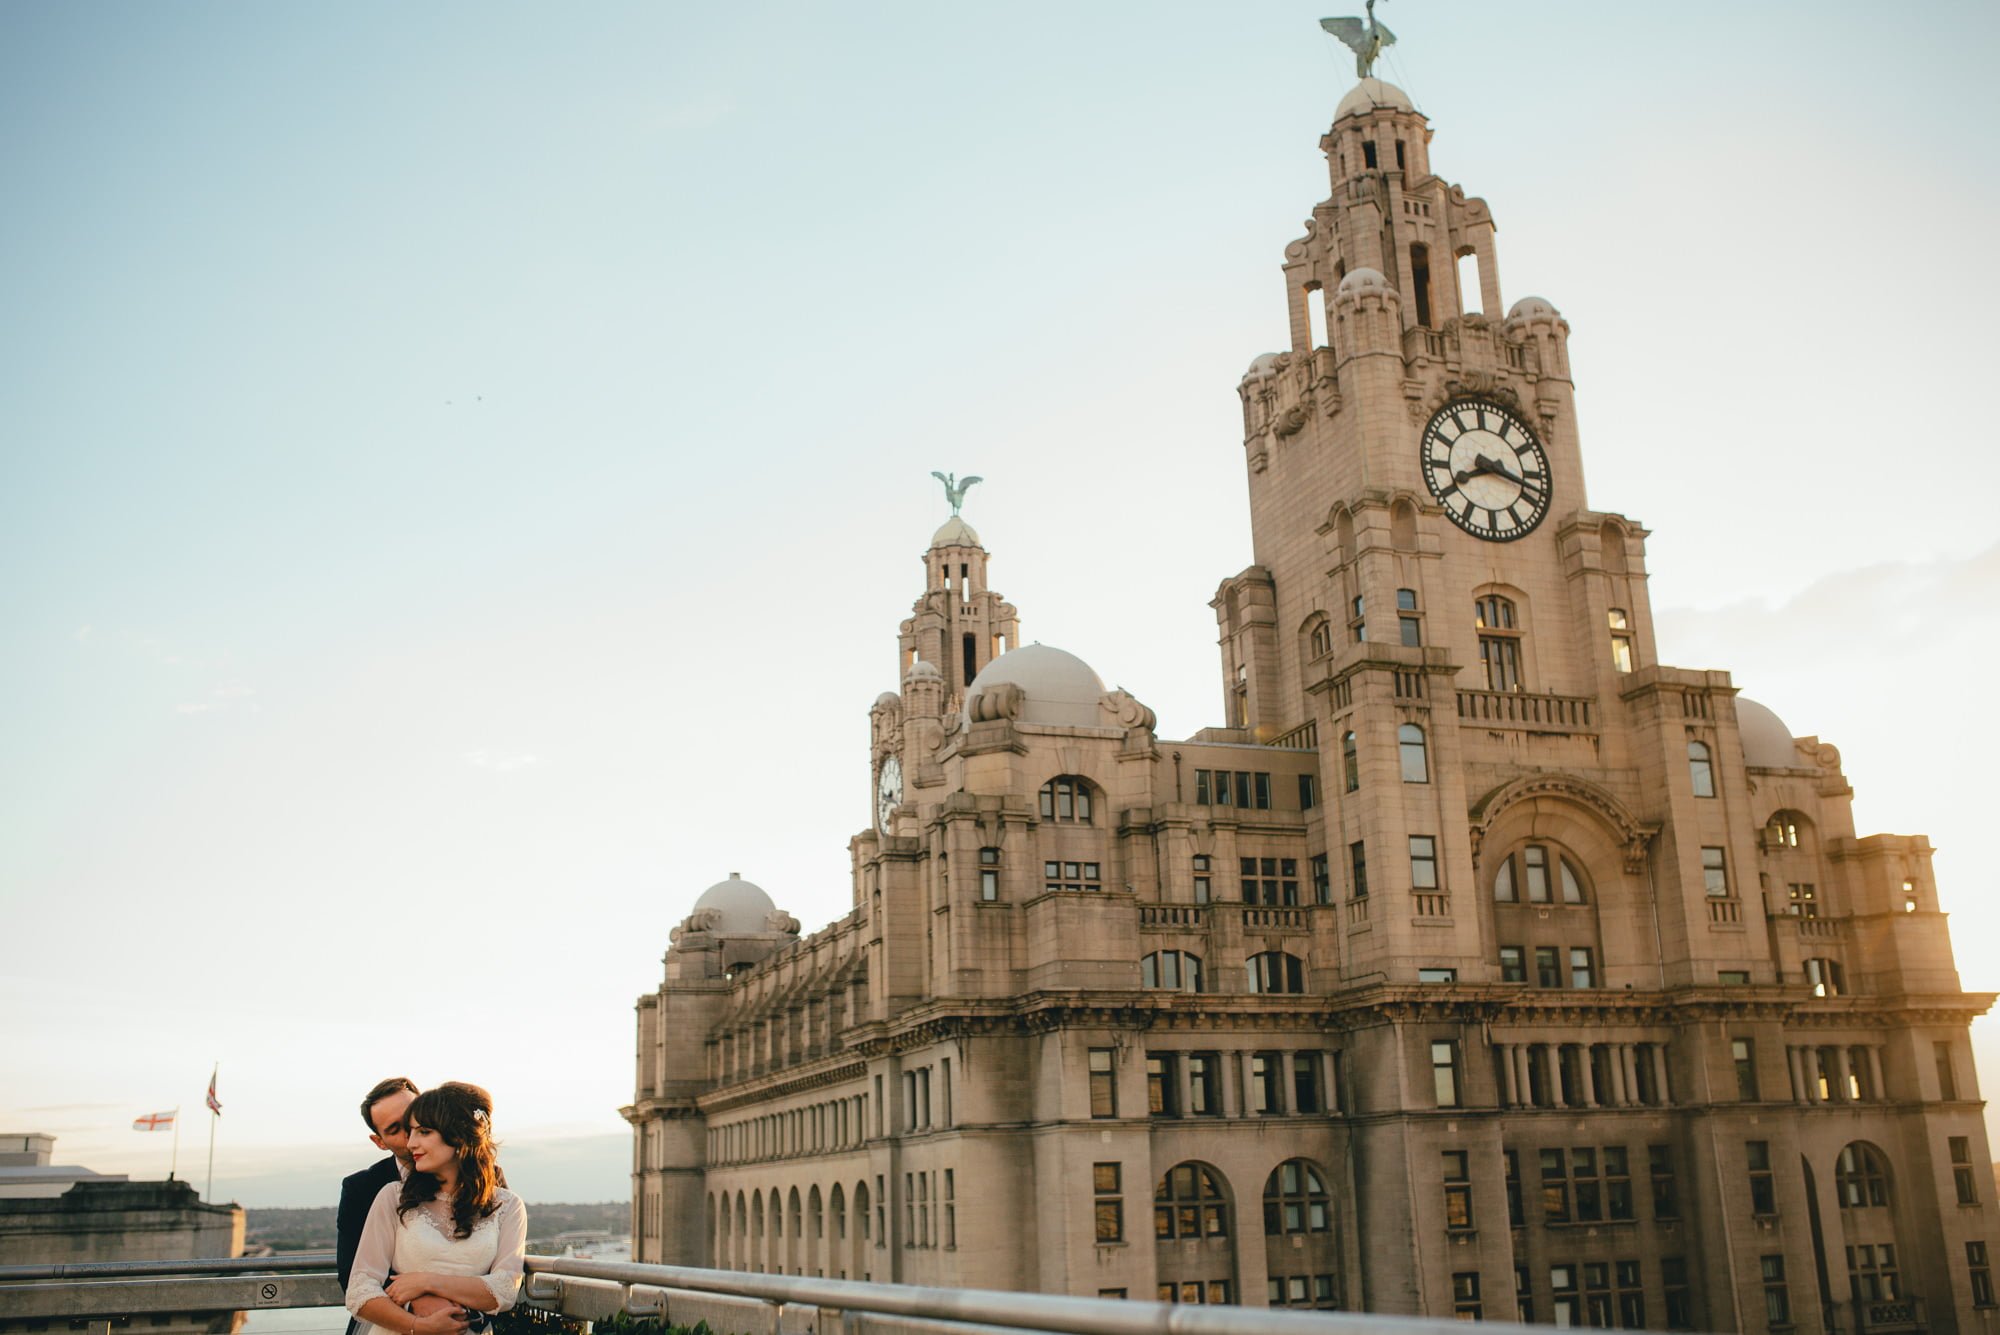 Oh my oh my wedding photography couple on roof by liver building at sunset